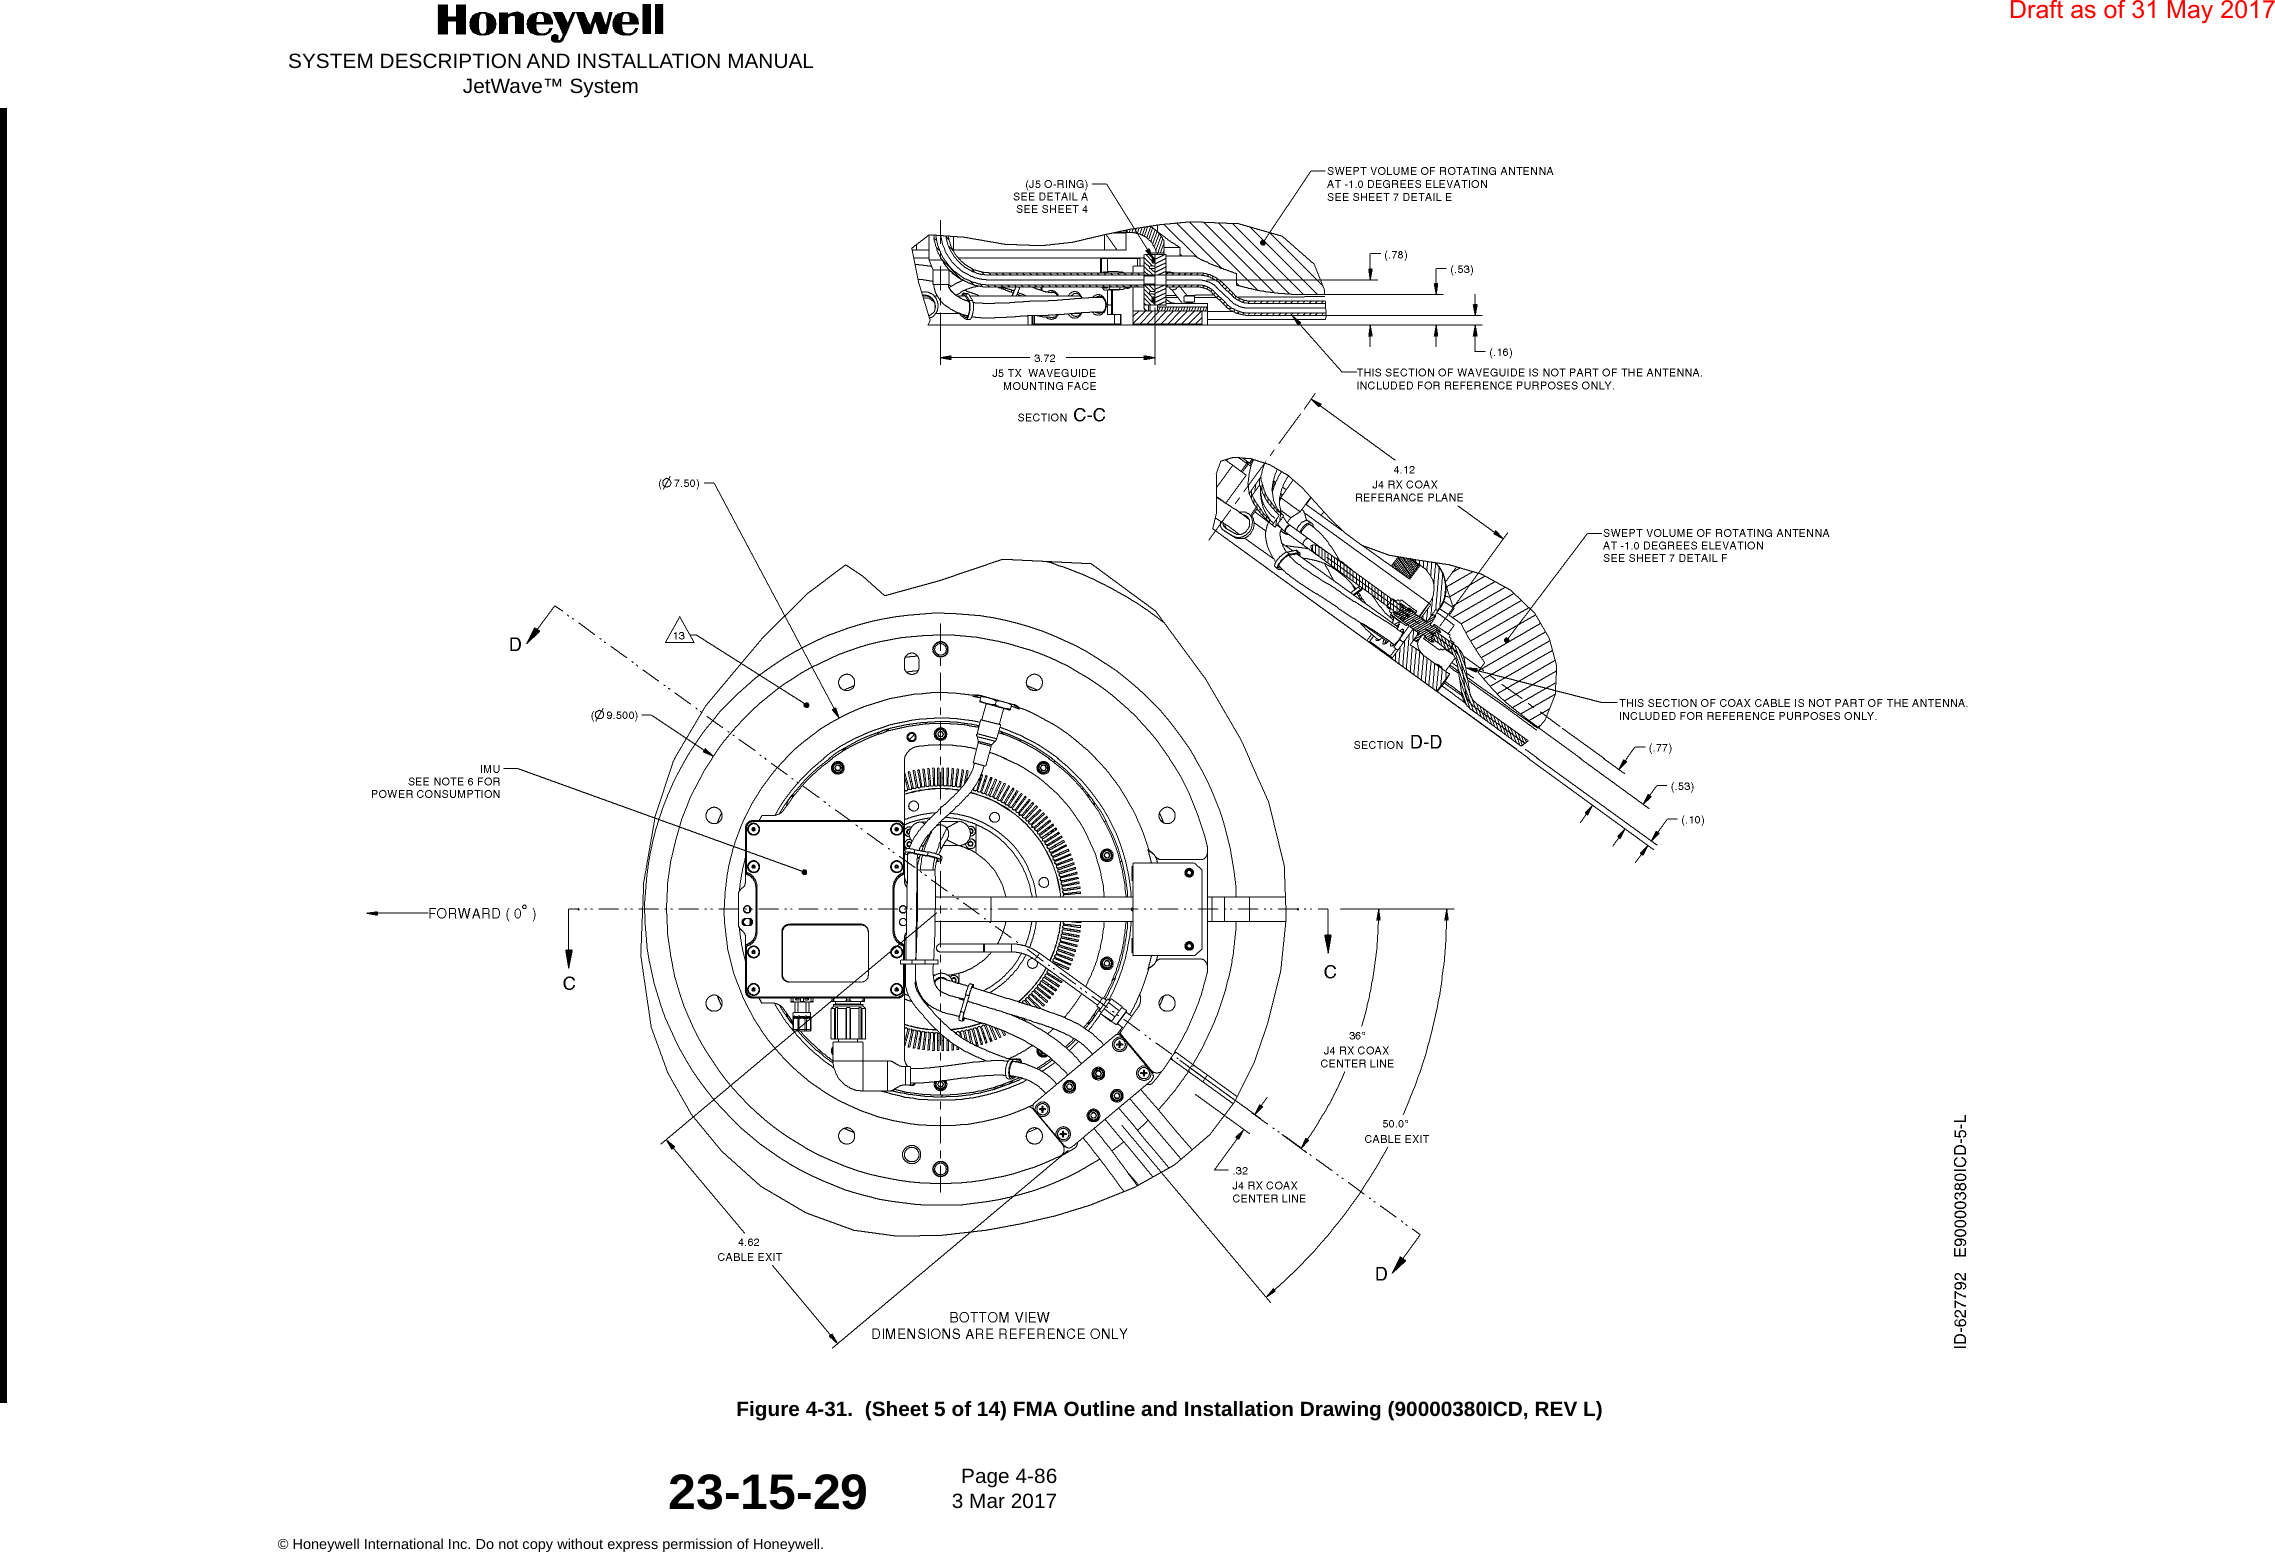 SYSTEM DESCRIPTION AND INSTALLATION MANUALJetWave™ SystemPage 4-86 3 Mar 2017© Honeywell International Inc. Do not copy without express permission of Honeywell.23-15-29Figure 4-31.  (Sheet 5 of 14) FMA Outline and Installation Drawing (90000380ICD, REV L)Draft as of 31 May 2017